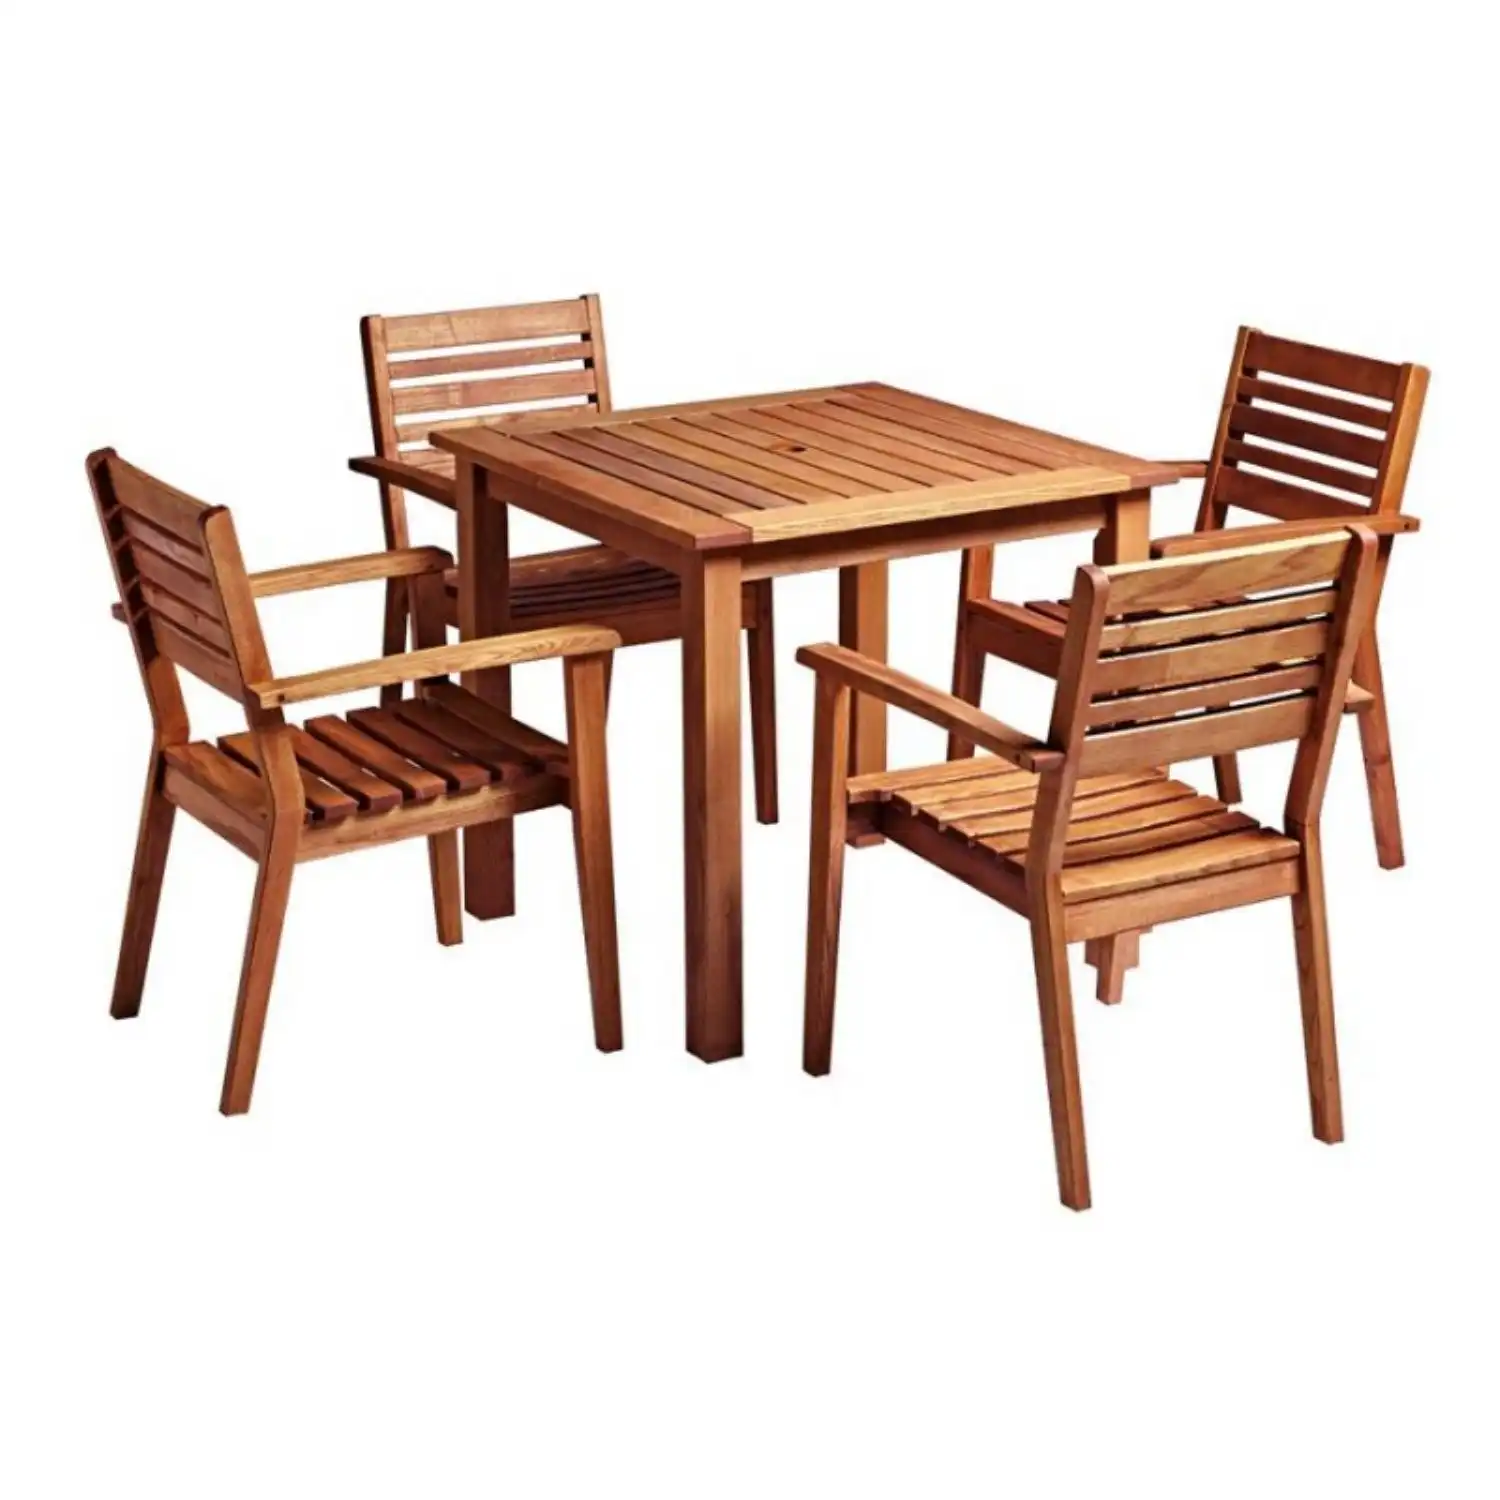 Outdoor Dining Table And 4 Chairs 80 X 80cm in Robinia Wood